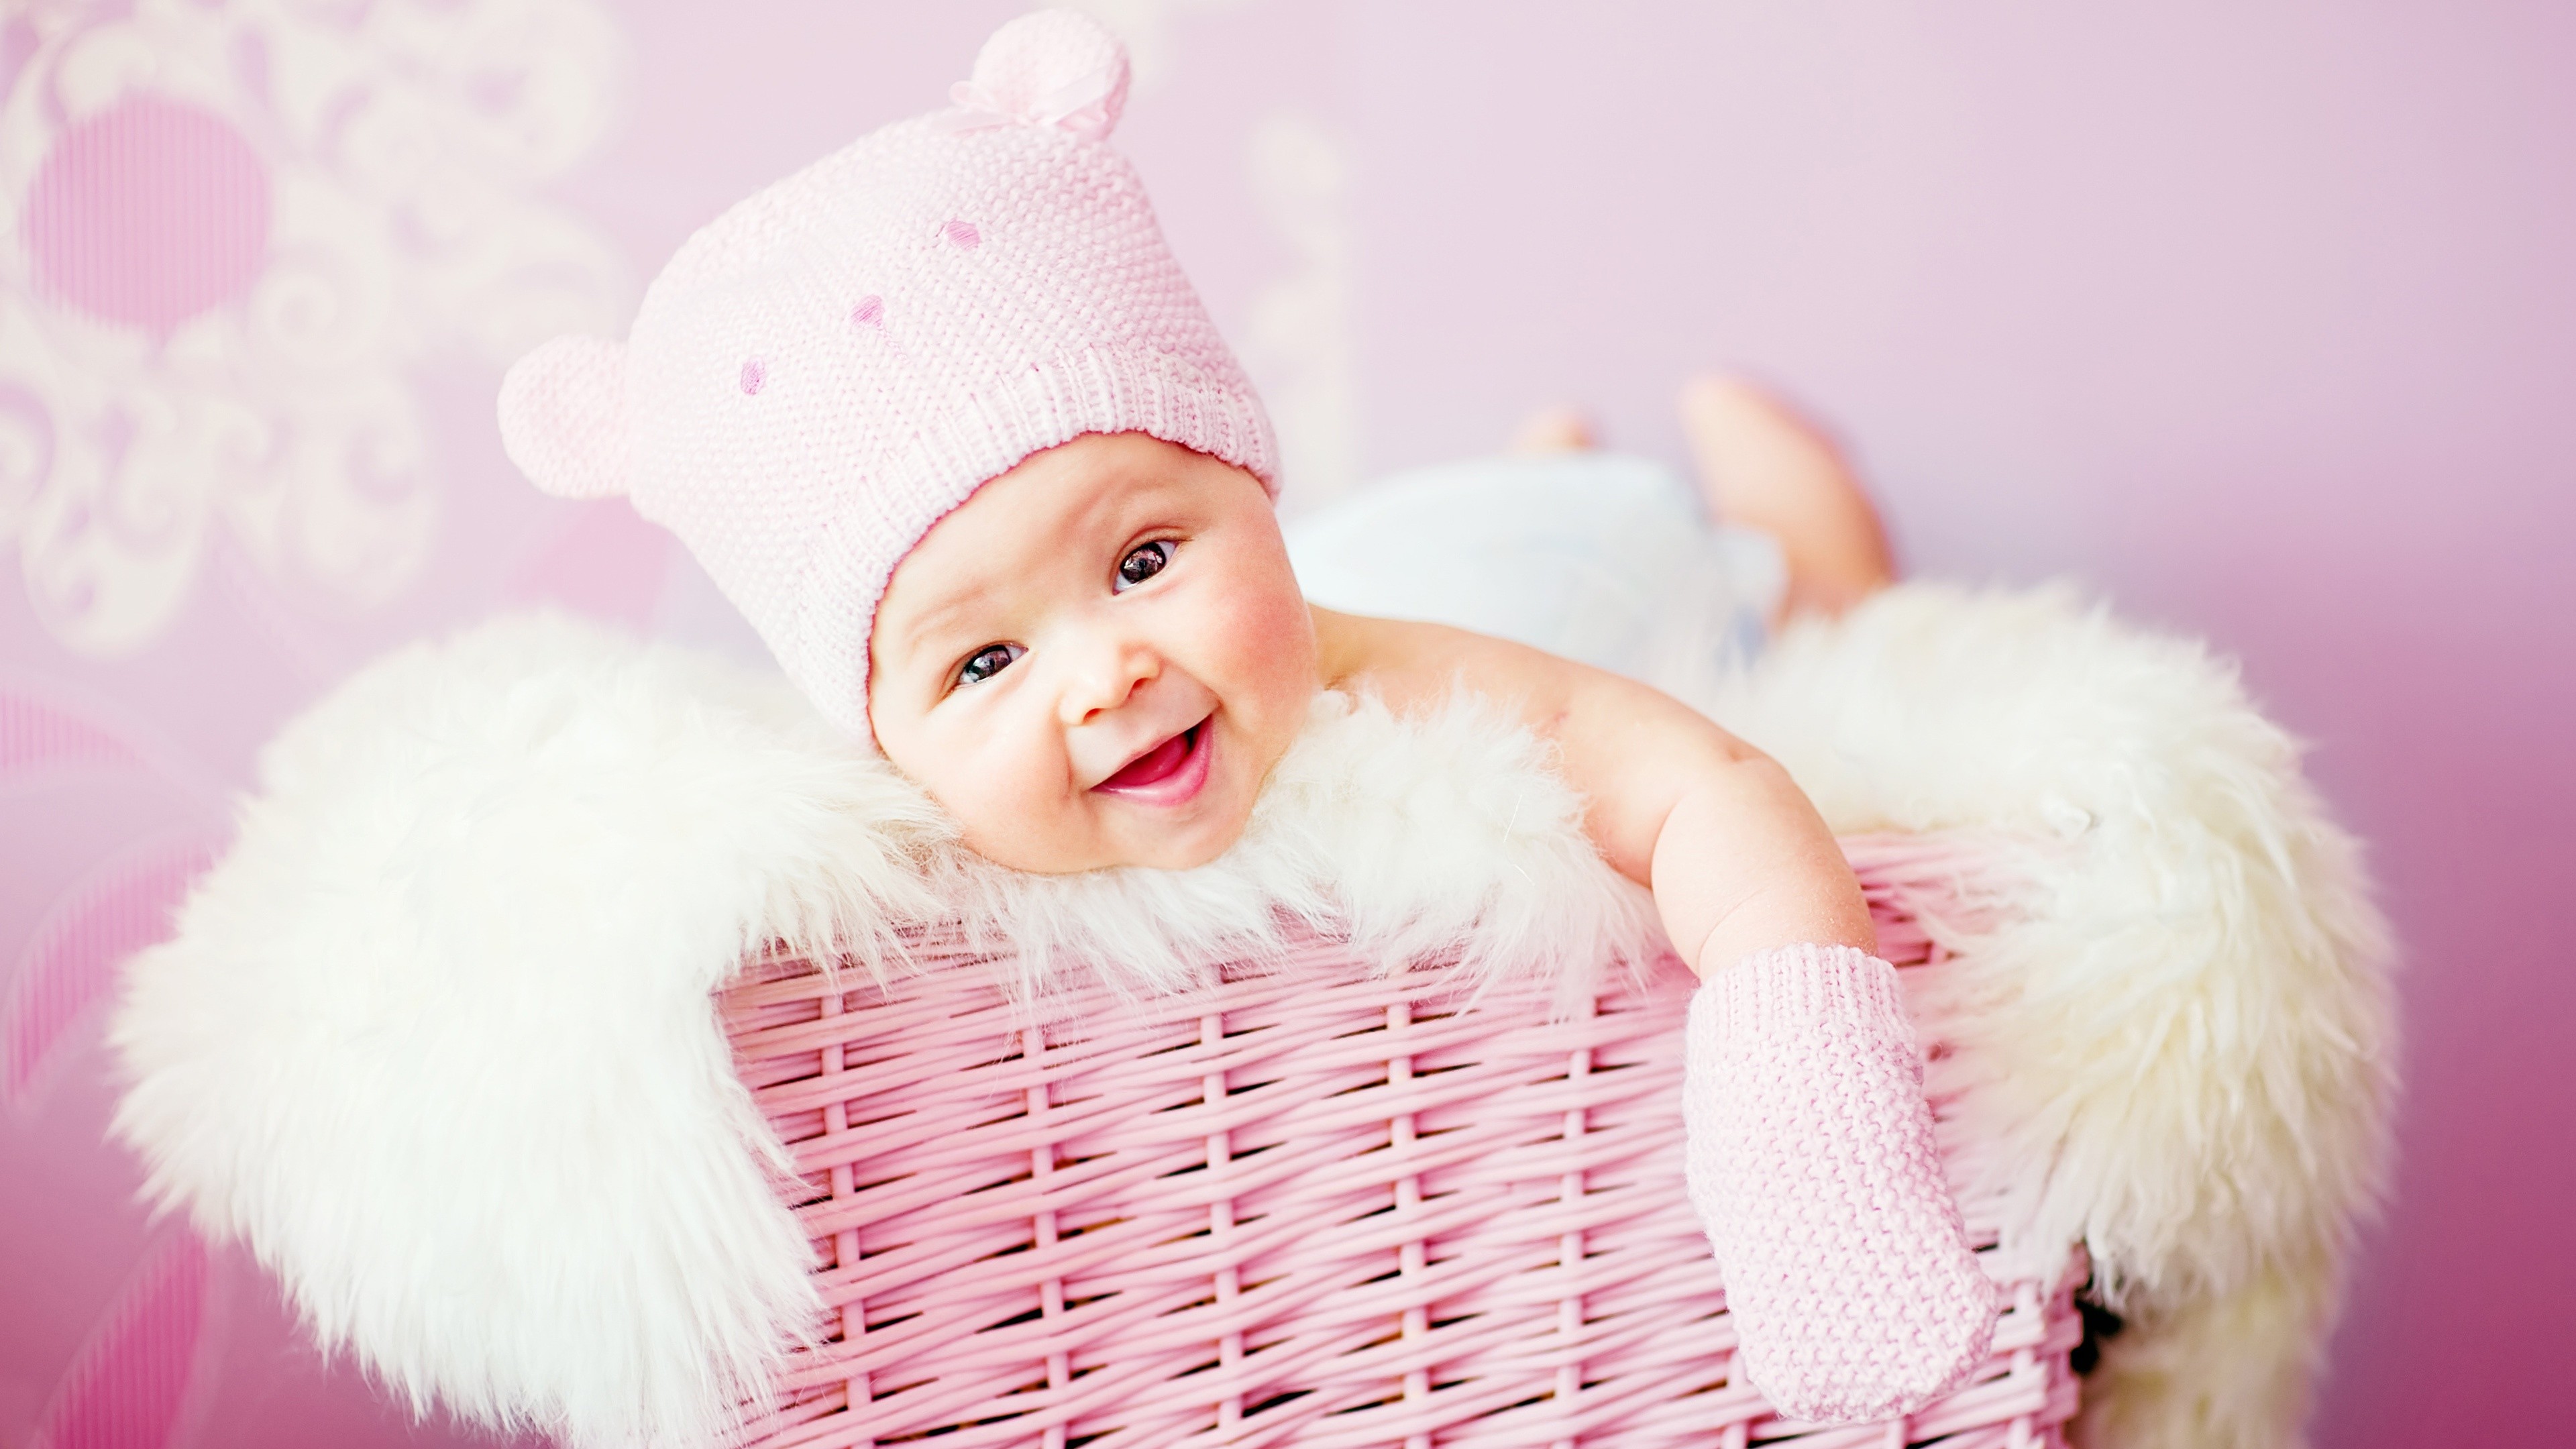 3840x2160 HD Cute Baby Wallpapers,Cute Baby Pictures,Cute Babies Pics,Cute Kids  Wallpapers,Cute Baby Girls Wallpapers in HD High Quality Resolutions - Page  2